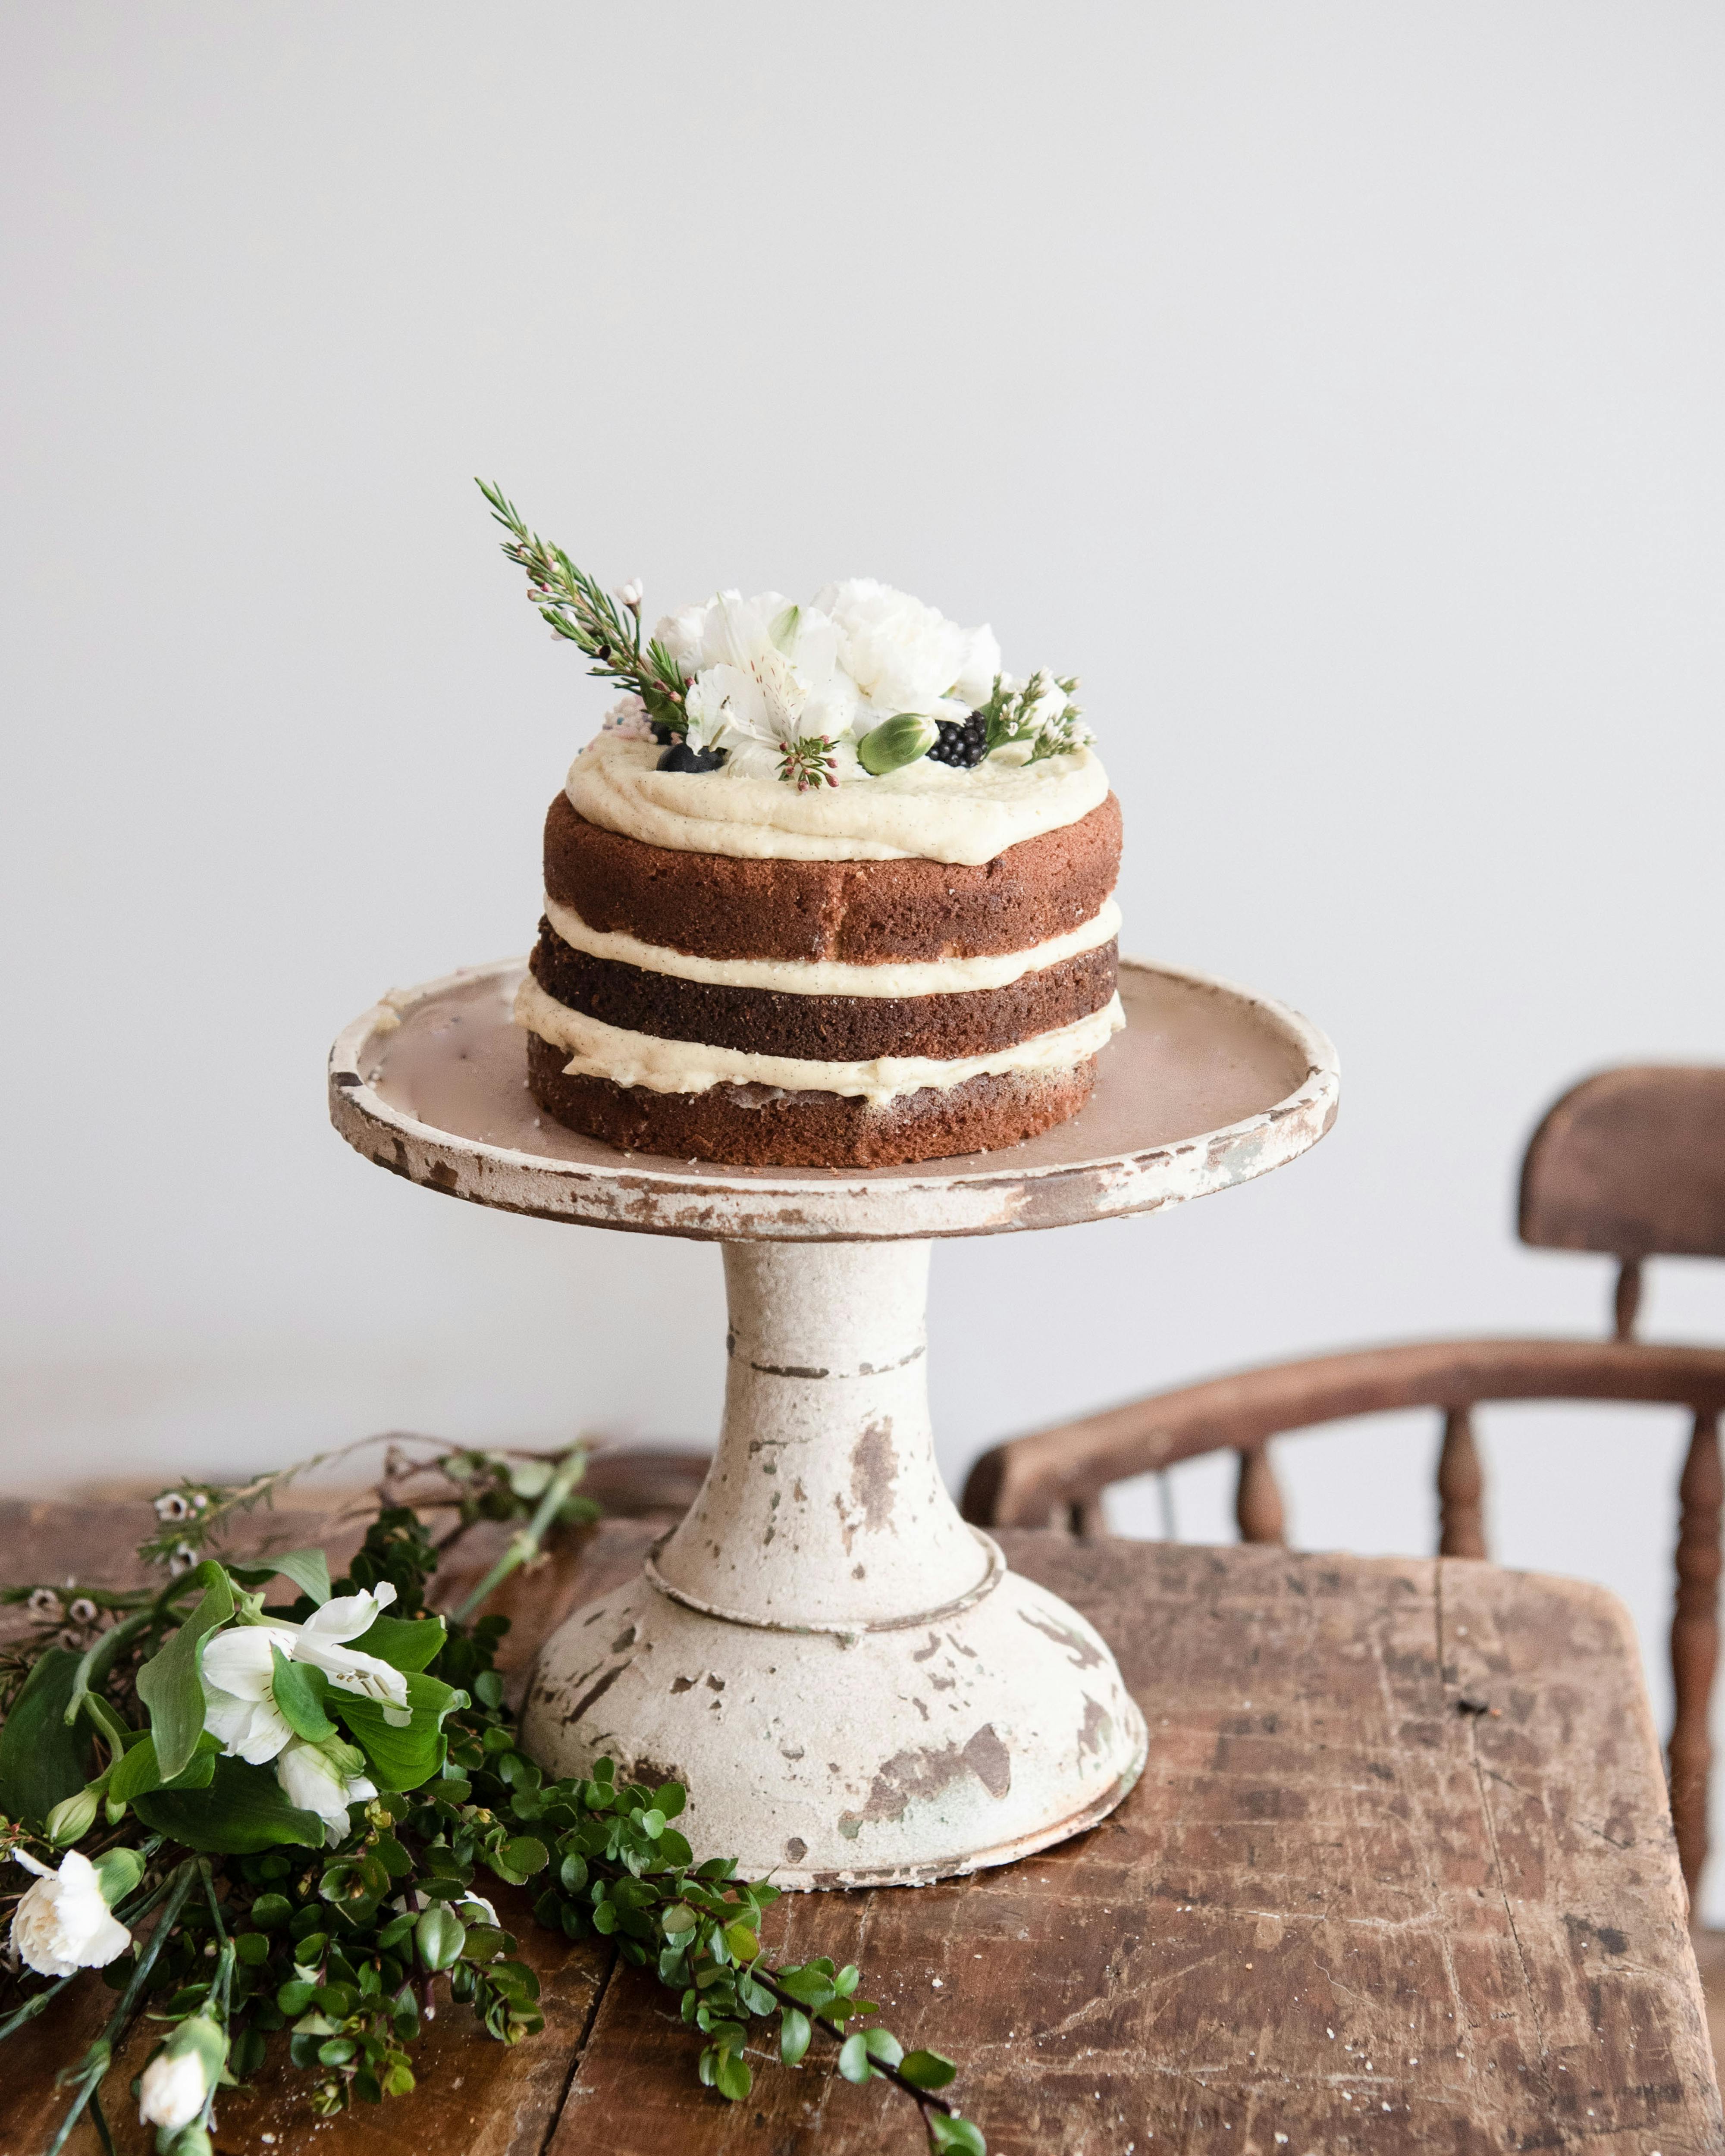 rustic naked cake on antique cake stand with white flowers on top

